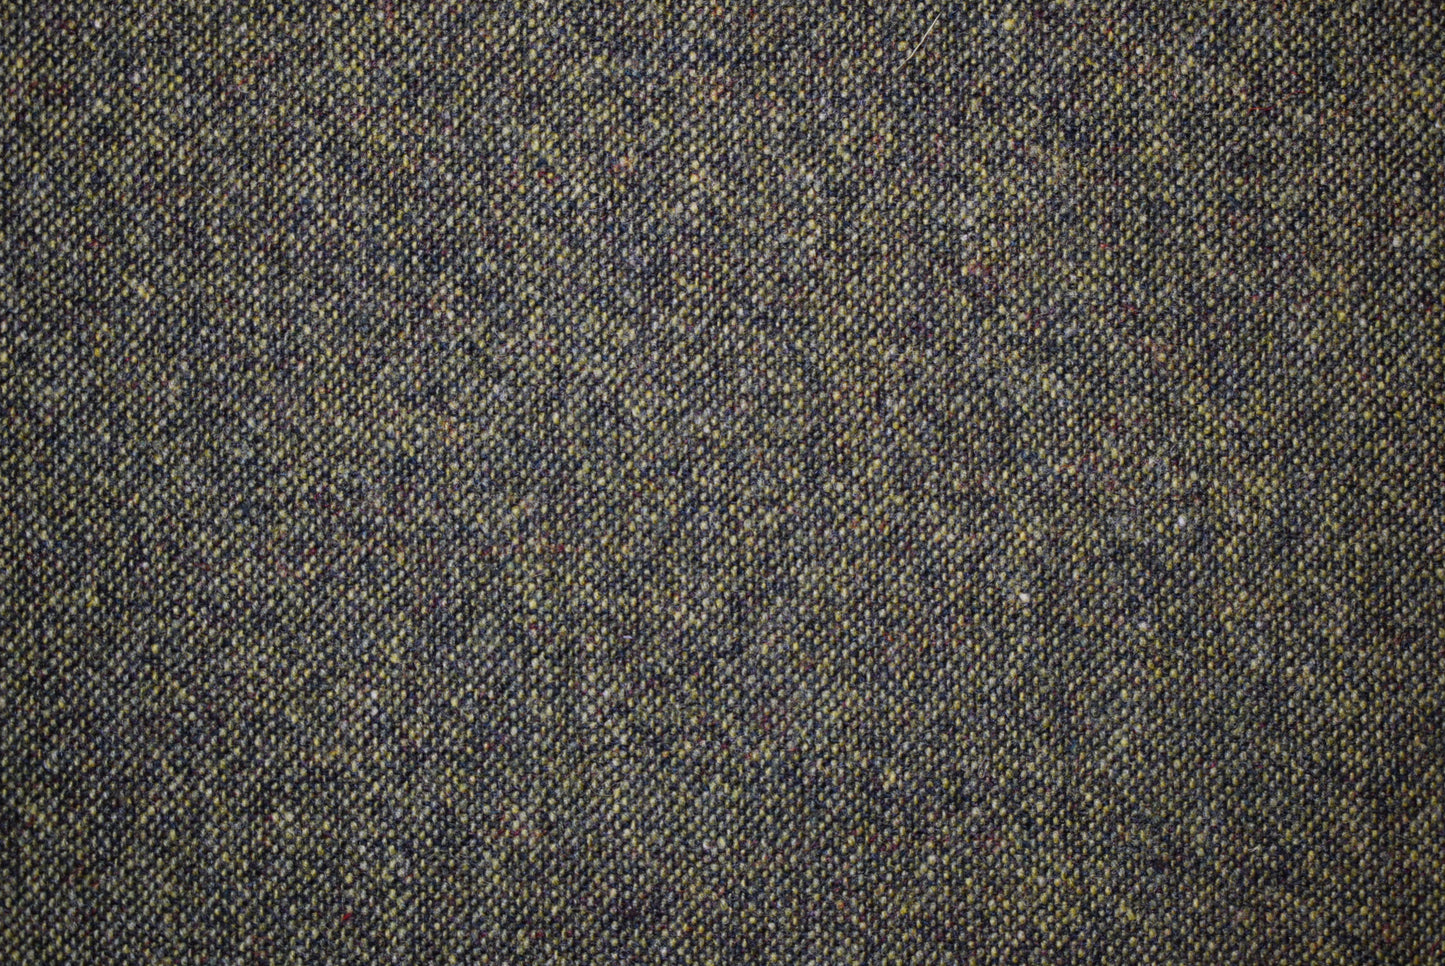 Donegal Tweed - Olive